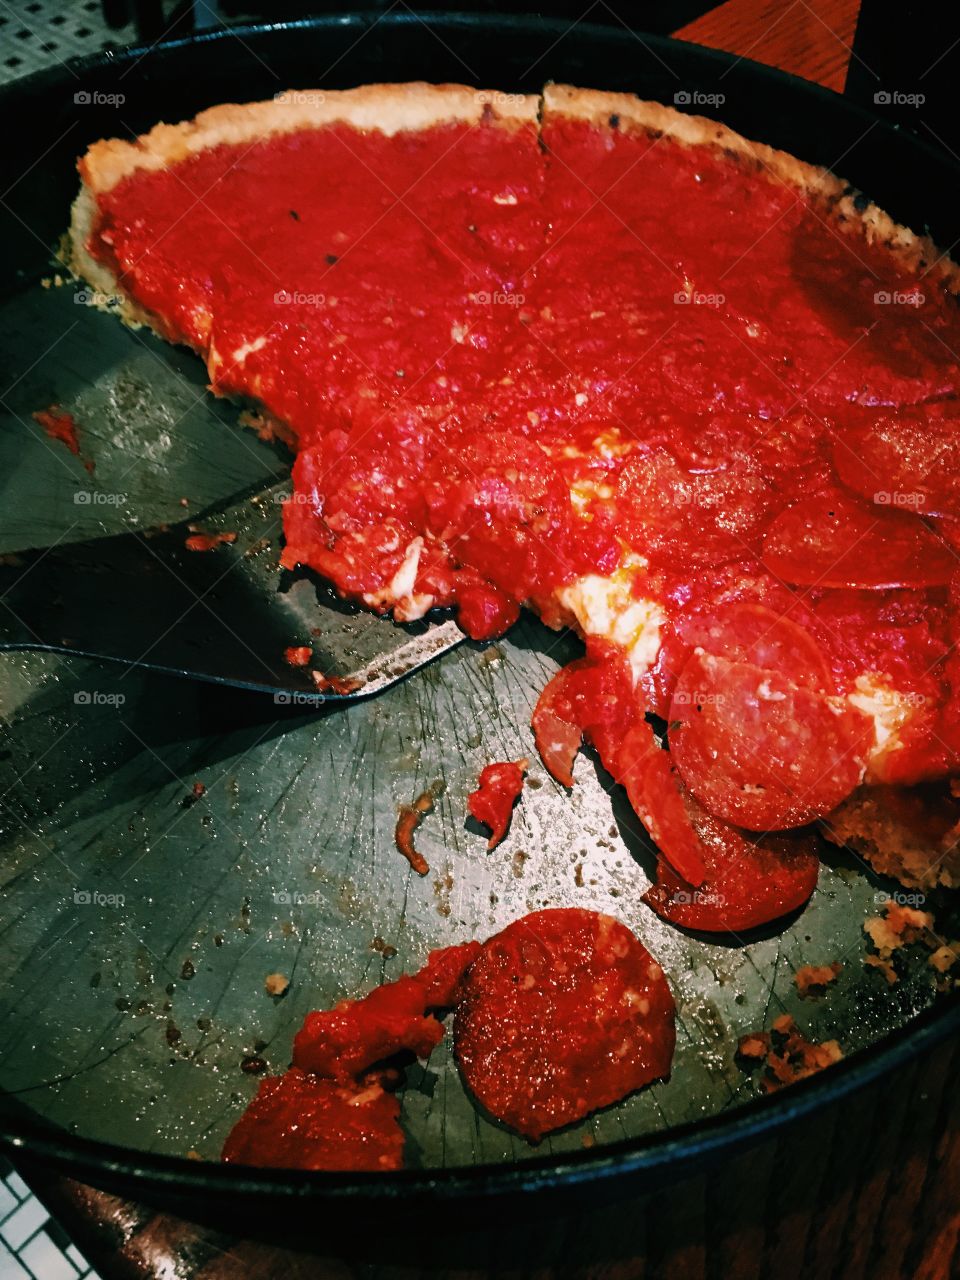 Deep Dish pizza from Chicago 